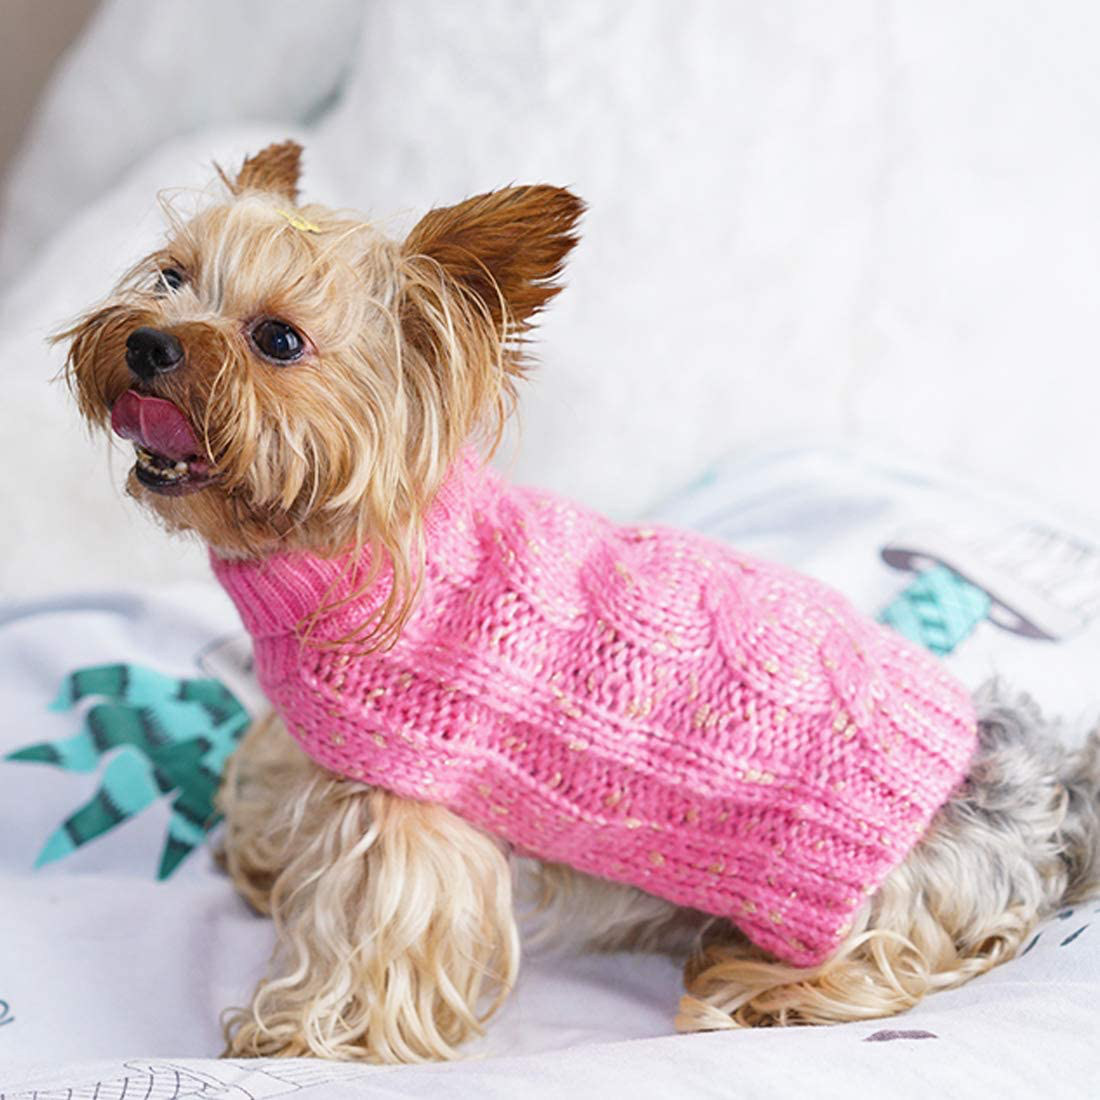 KYEESE Dog Sweaters Turtleneck Dog Pullover Sweater Knitwear with Golden Yarn Warm Pet Sweater for Fall Winter